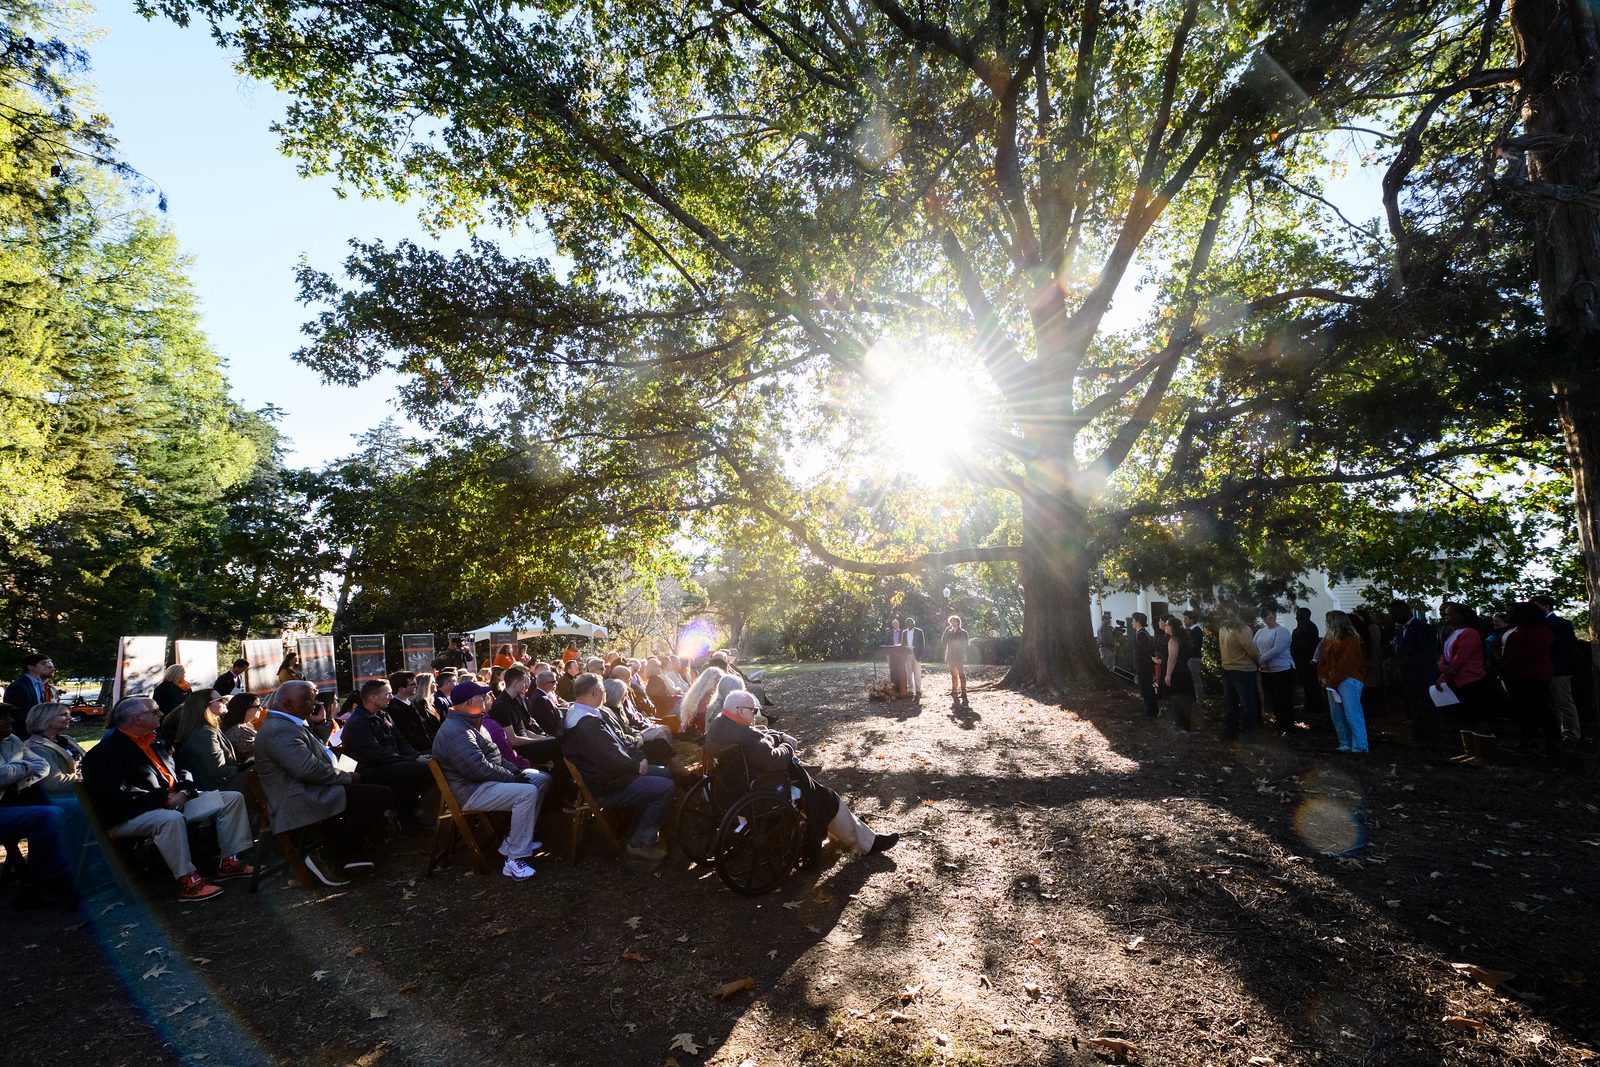 Sun shining through trees on group of people